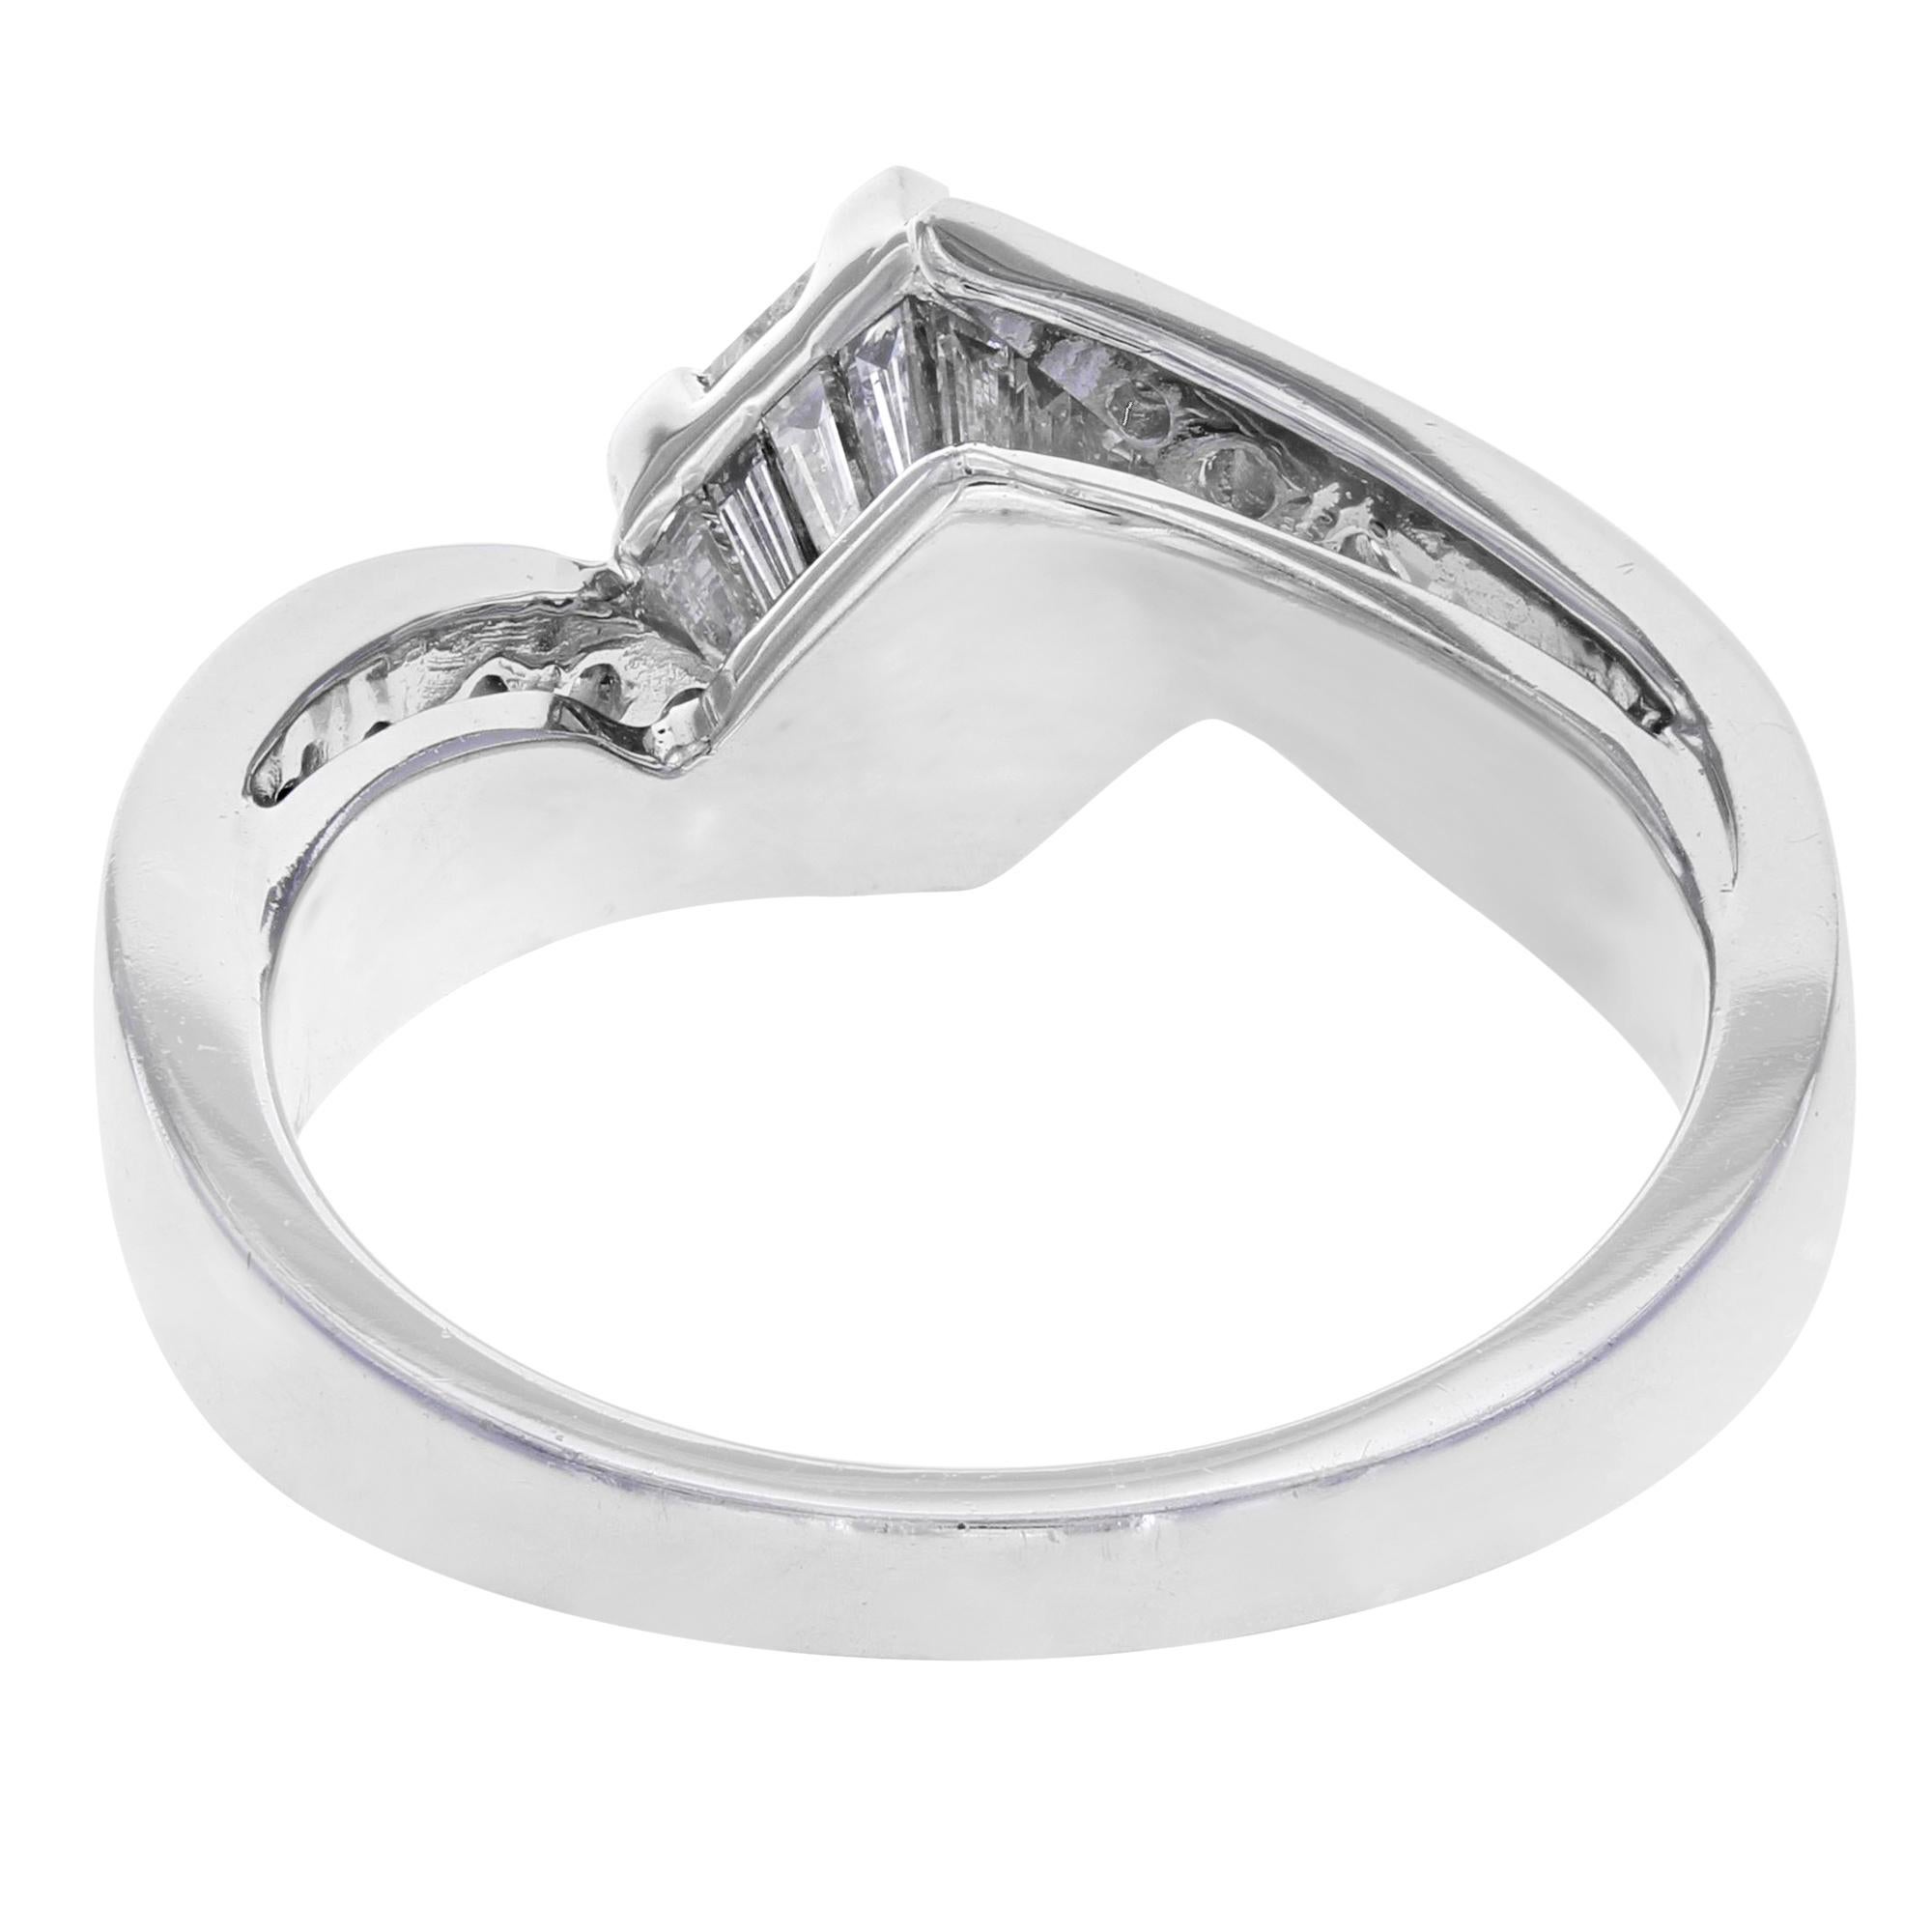 This beautiful diamond engagement ring is crafted in 14K white gold. It features a center princess cut white diamond weighing apprx. 0.62ct with 10 round brilliant cut diamond accents and 16 baguette cut white diamond stones weighing appx. 0.73ct.